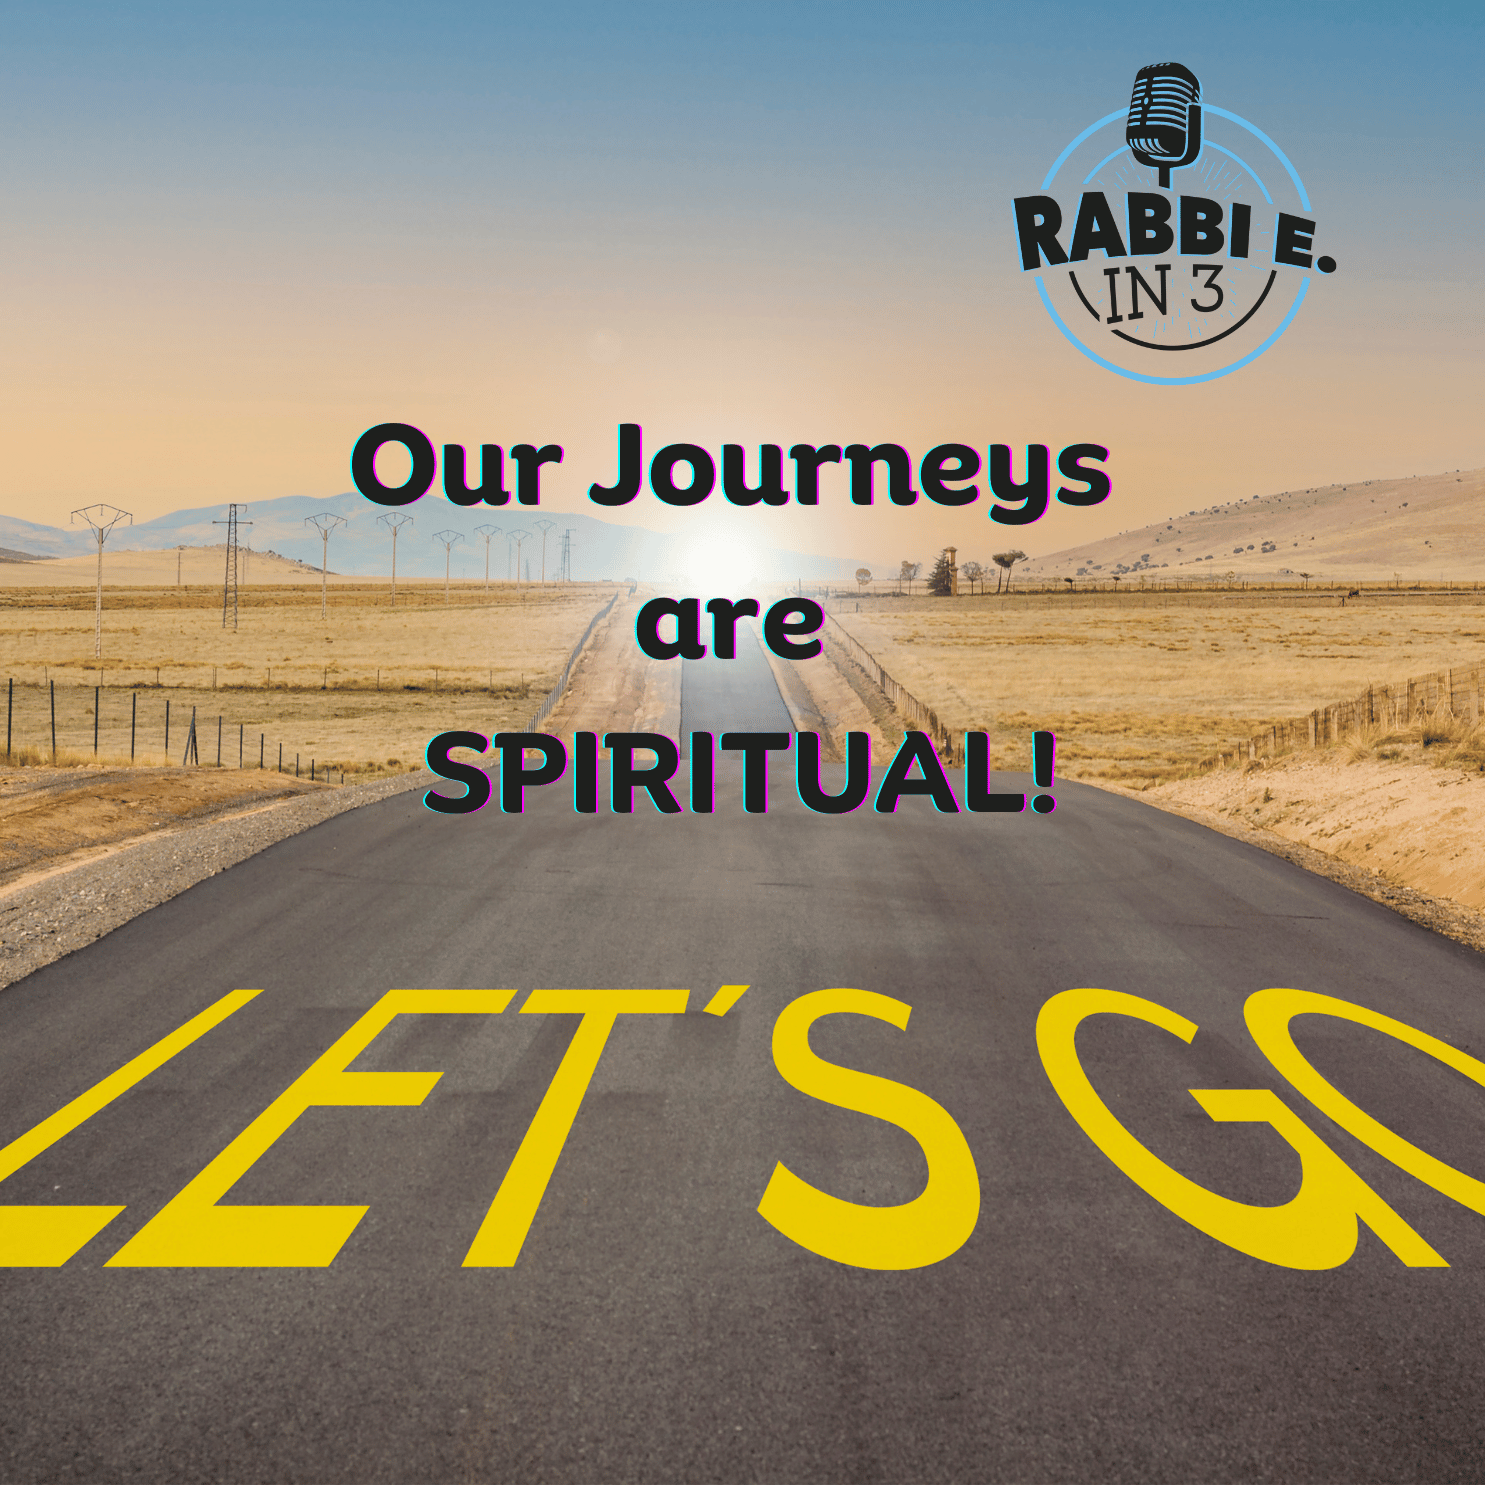 Our Journeys are Spiritual!